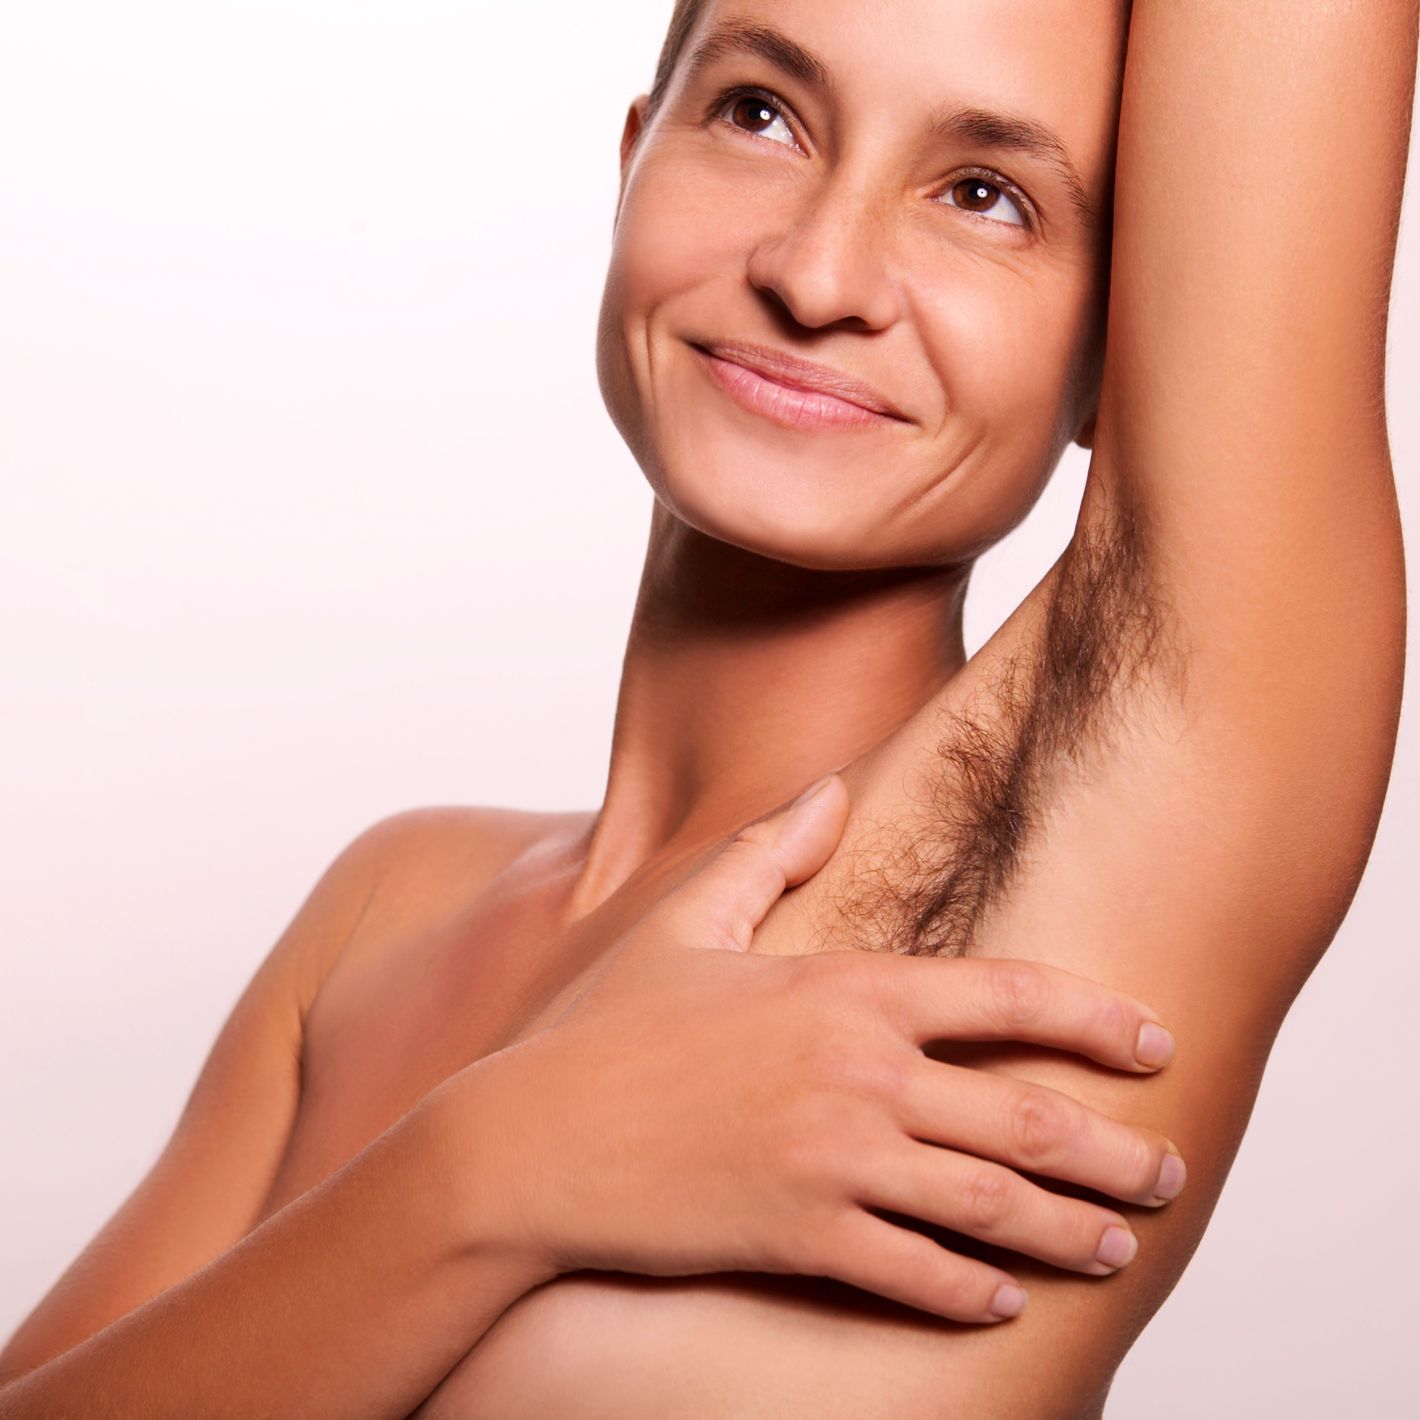 Why Are We Grossed Out by Women With Armpit Hair?